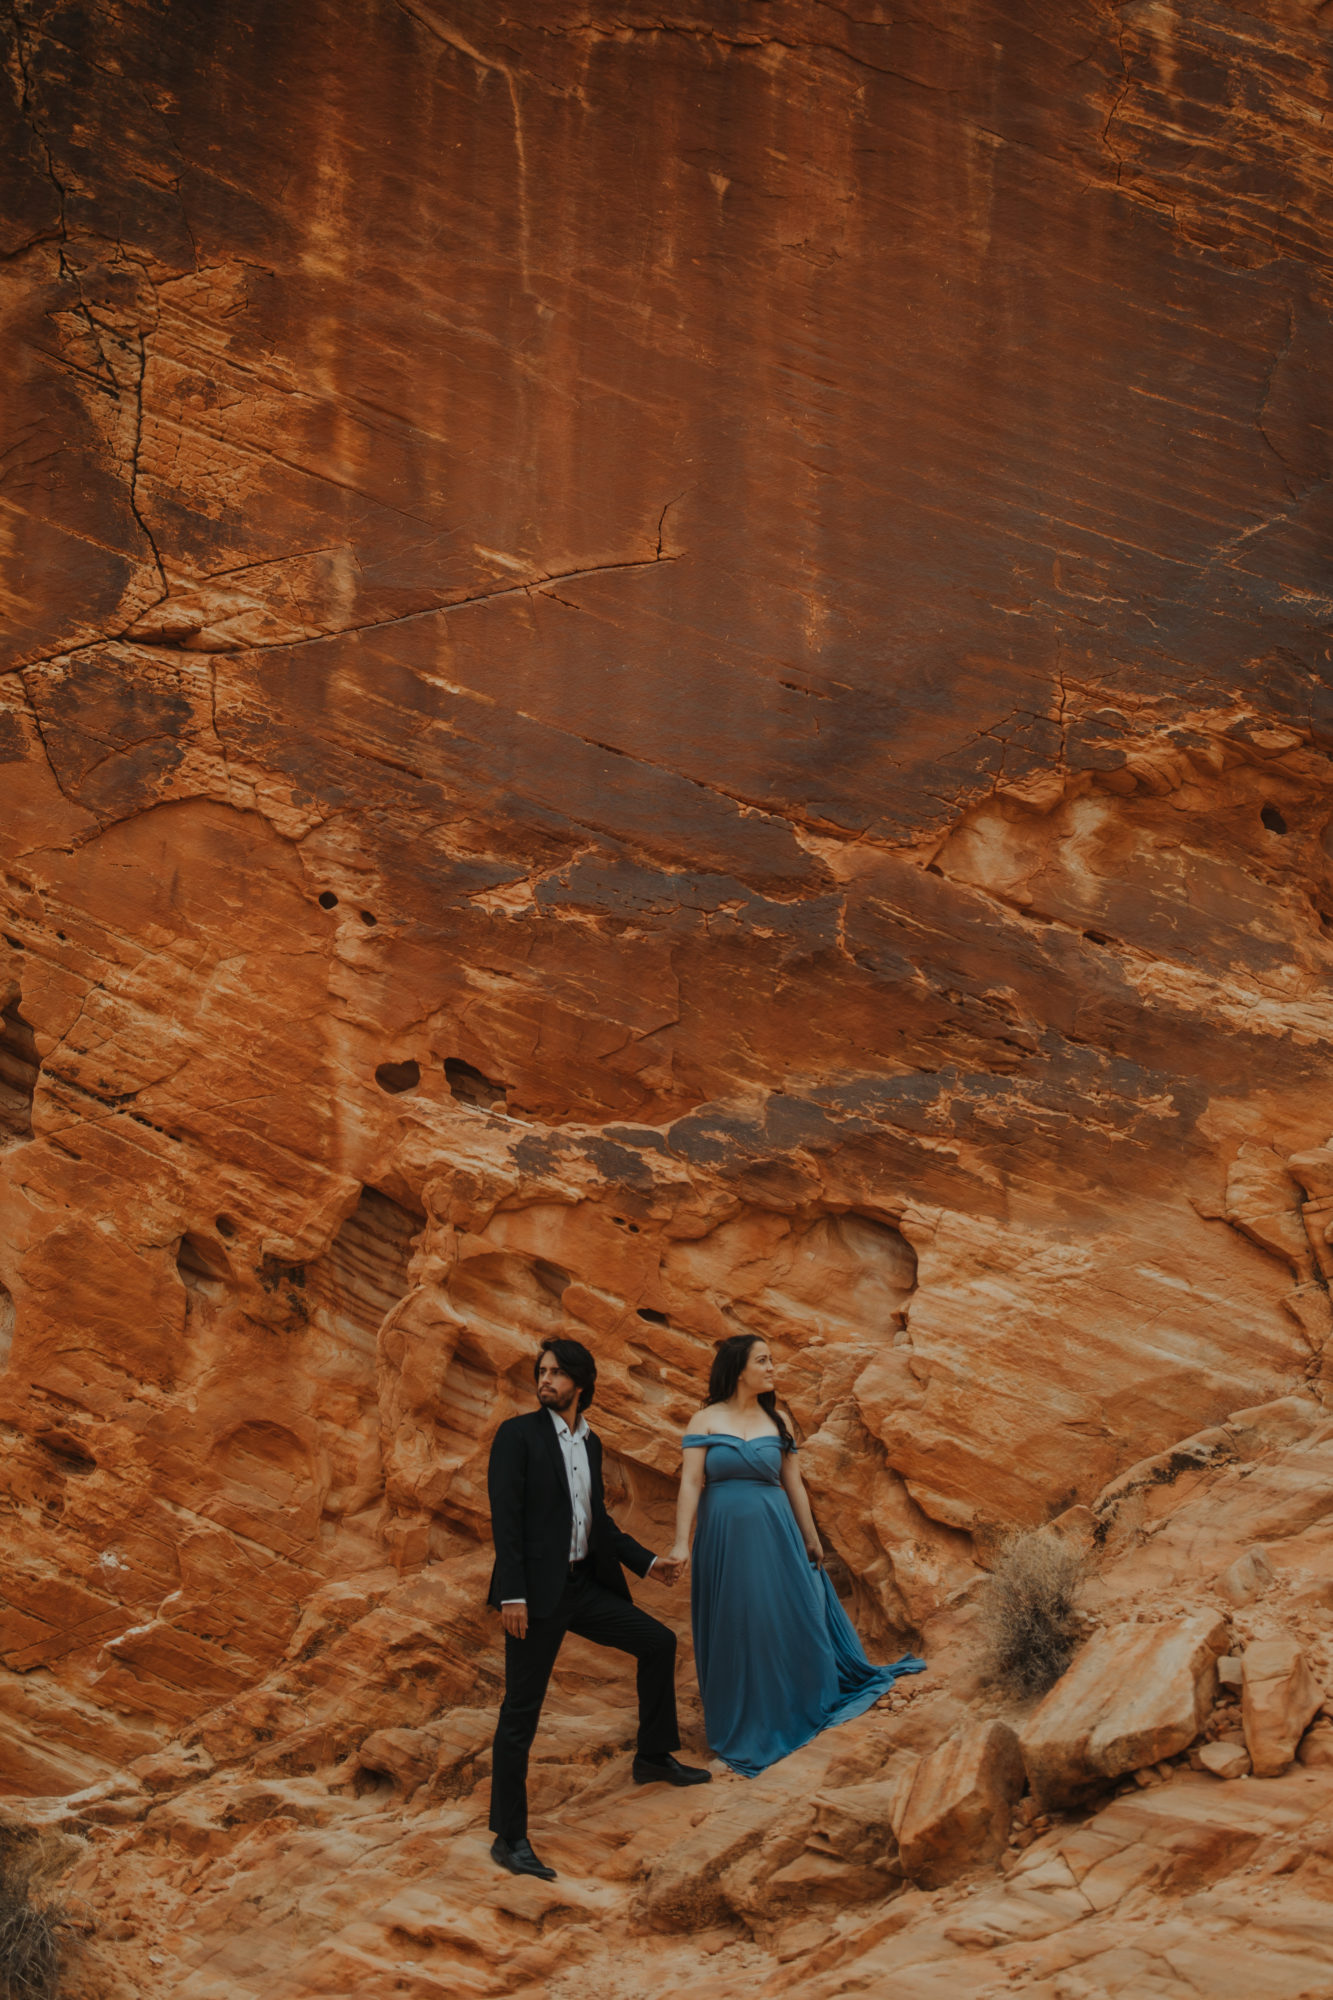 Couple wearing formal attire walking down red cliff